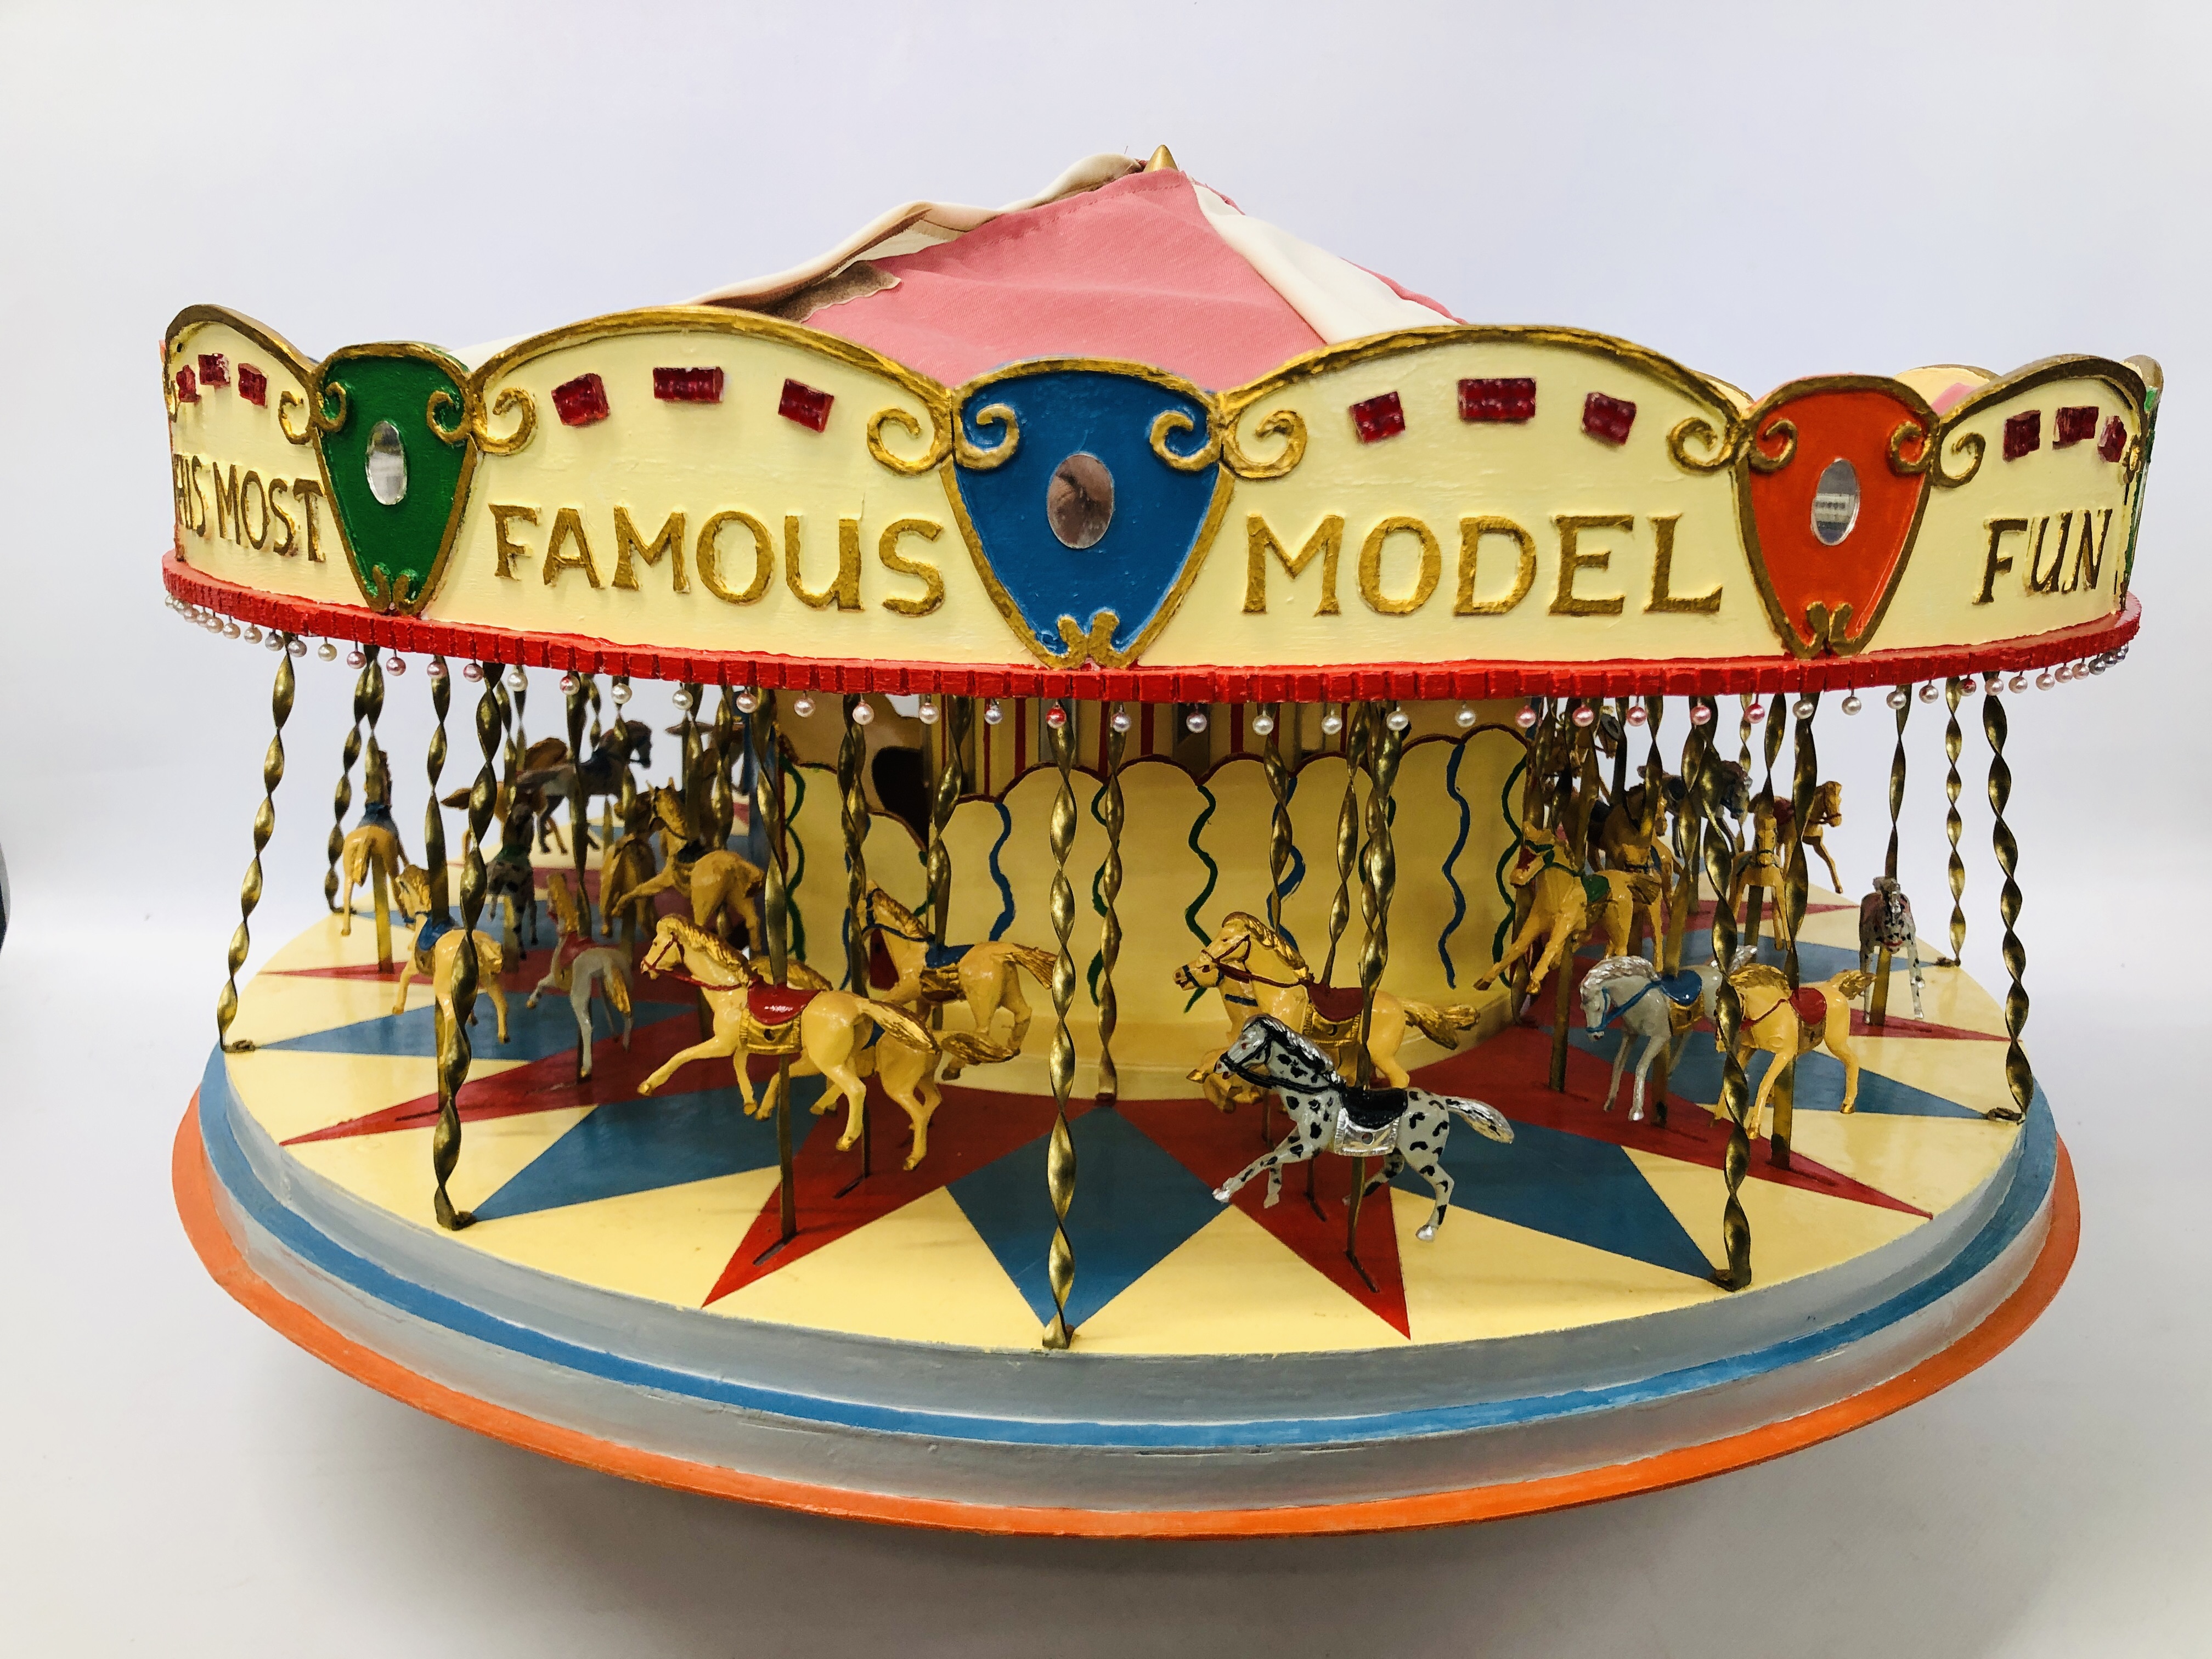 A VINTAGE HANDCRAFTED WOODEN MODEL OF A FAIRGROUND CAROUSEL WITH MOTORISED ACTION AND LIGHTS -